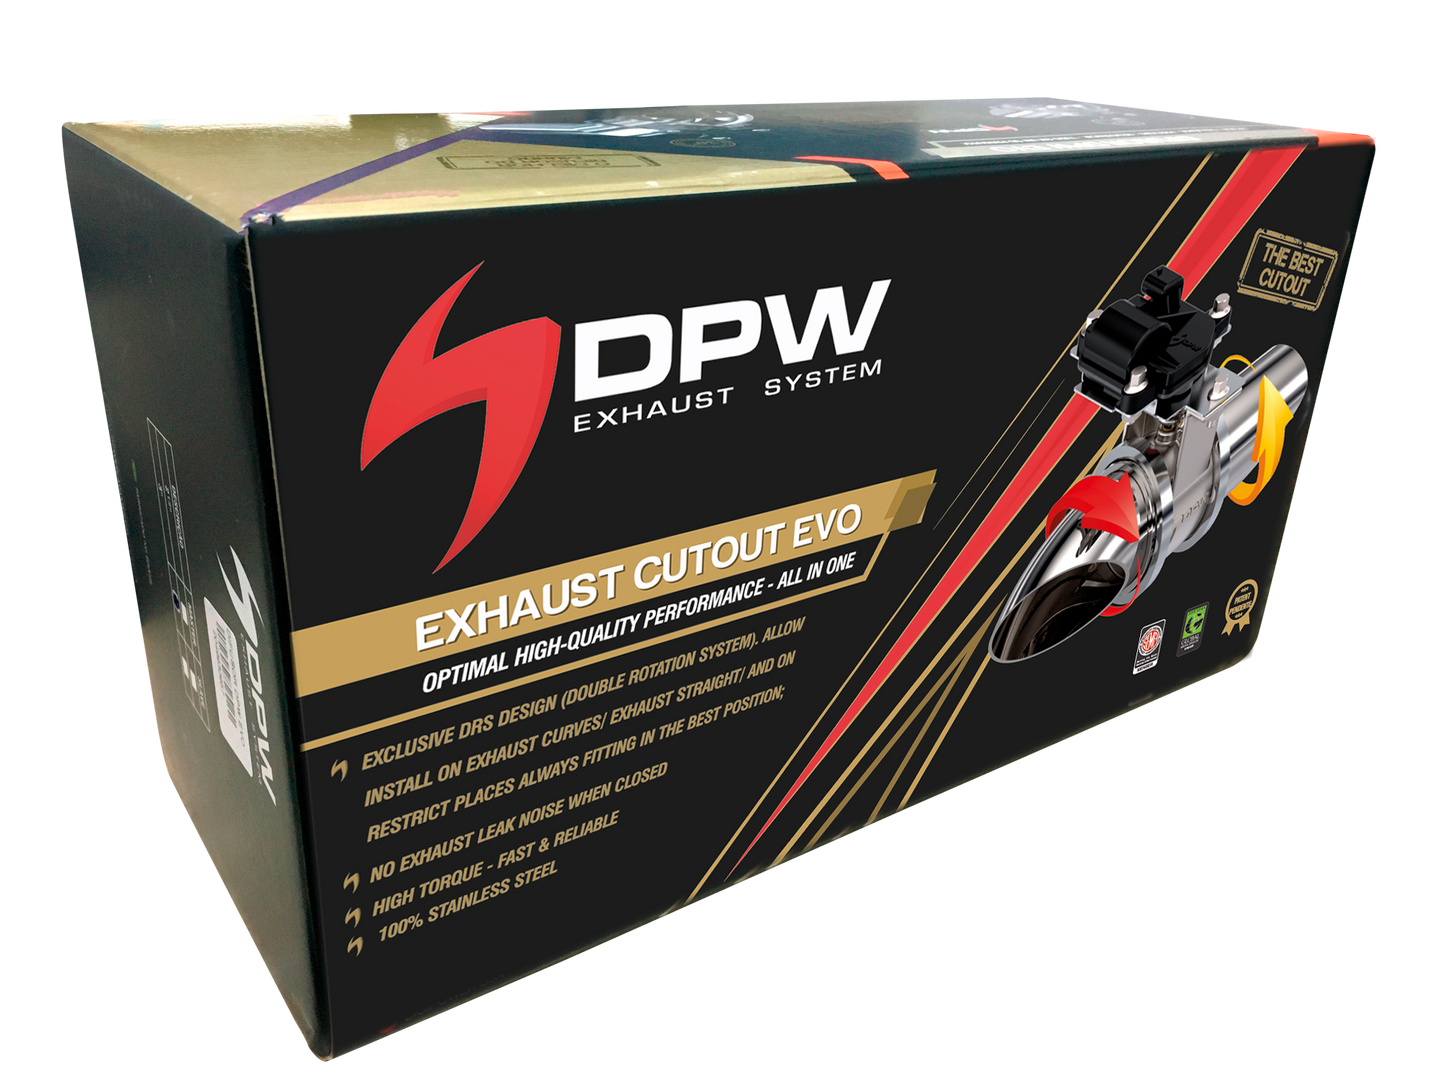 DPW Exhaust Cutout EVO Kit for Single Exhaust 3"